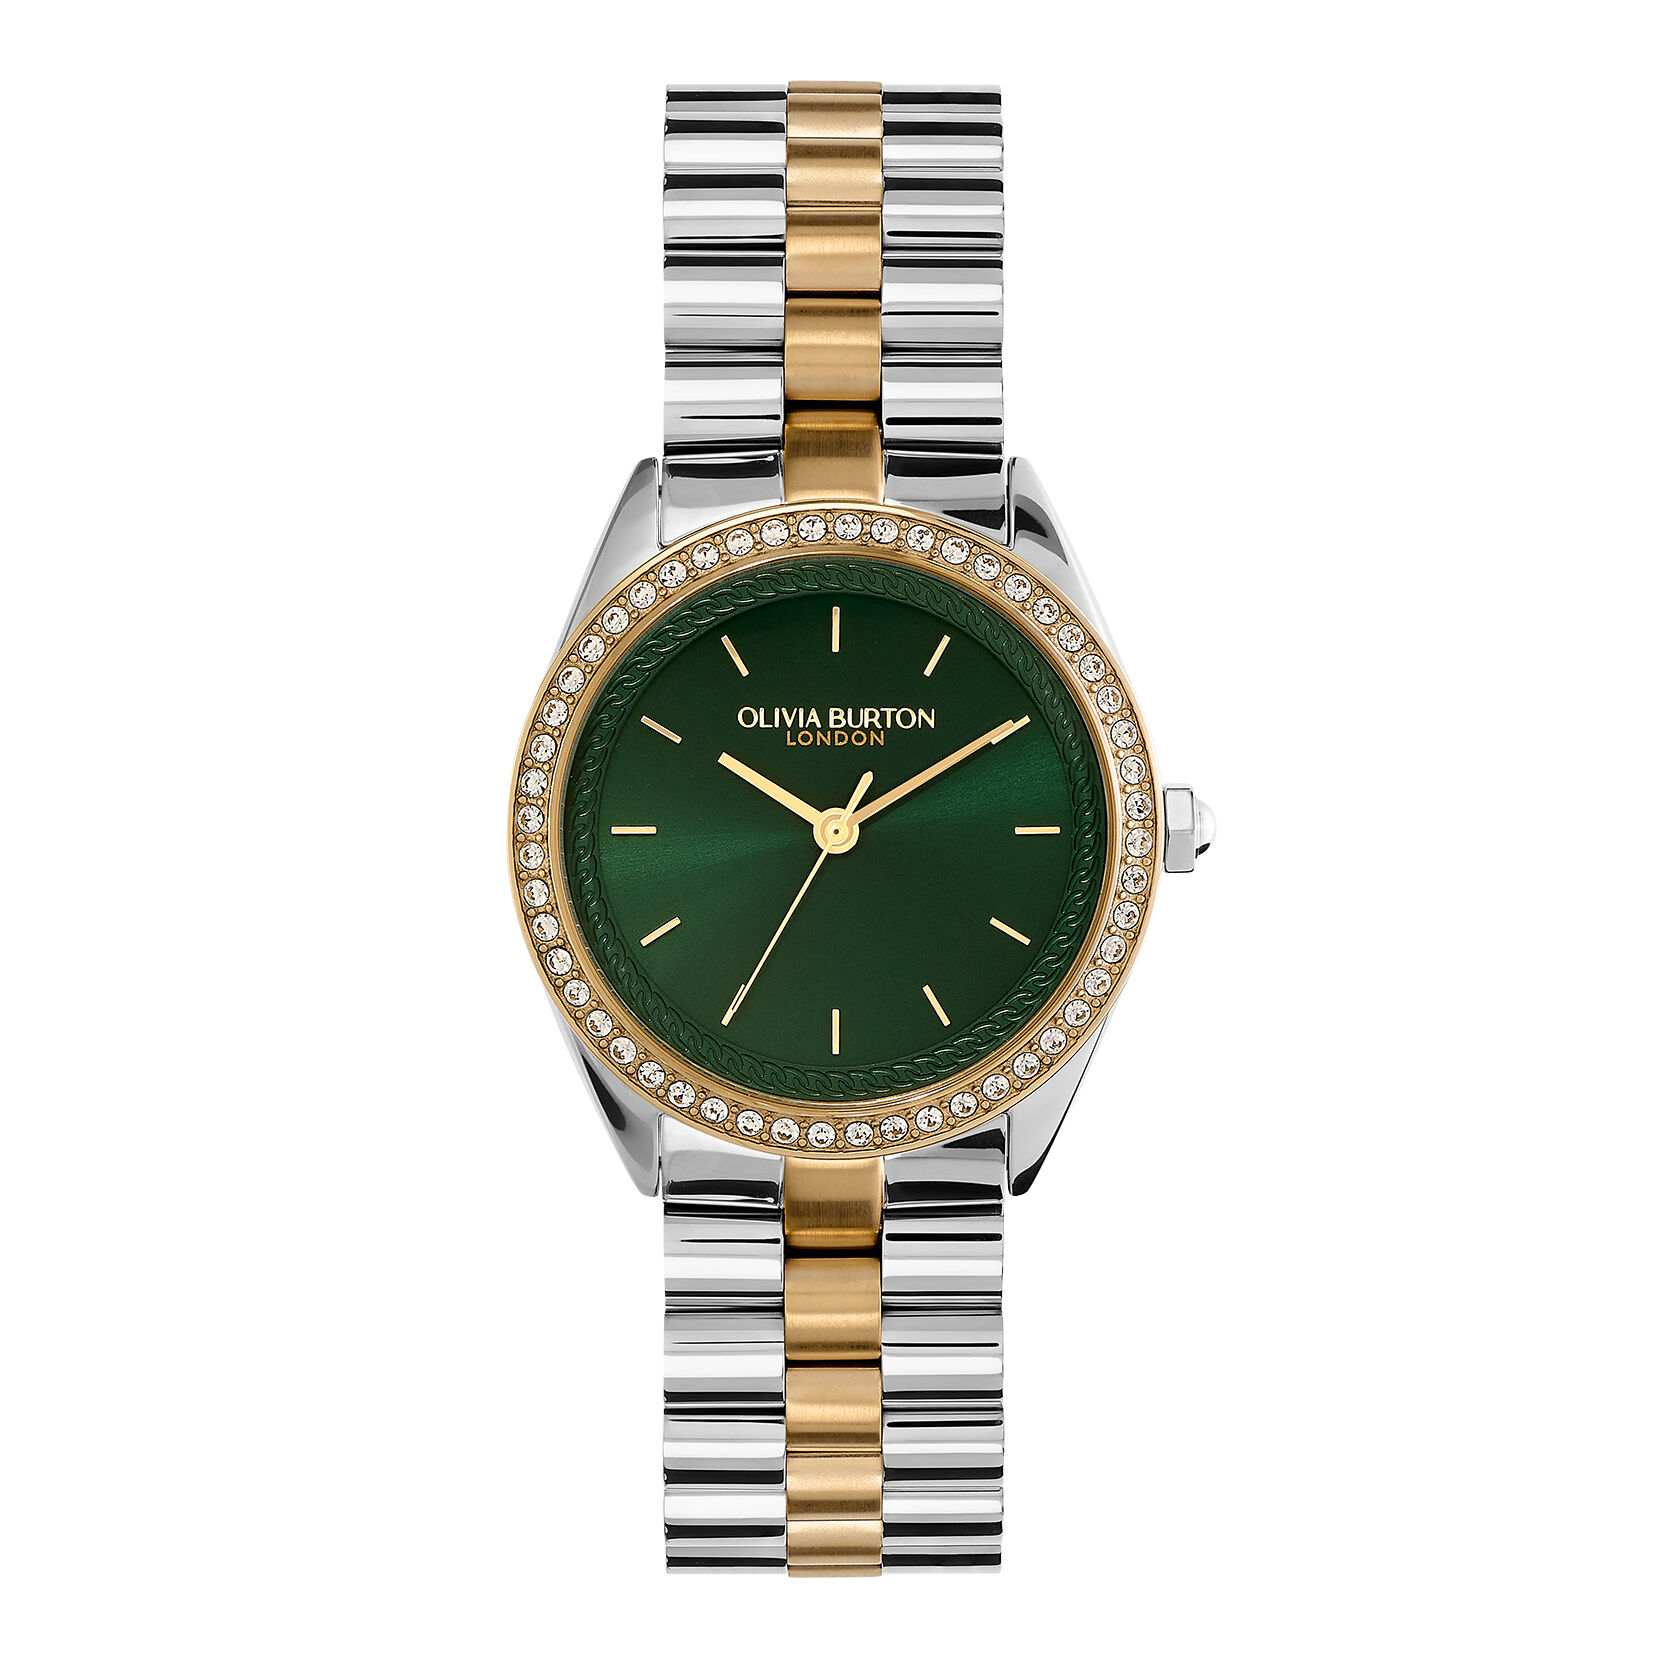 Rolex 1500 Green Dial Oyster Perpetual DateJust Automatic 34mm Watch | eBay